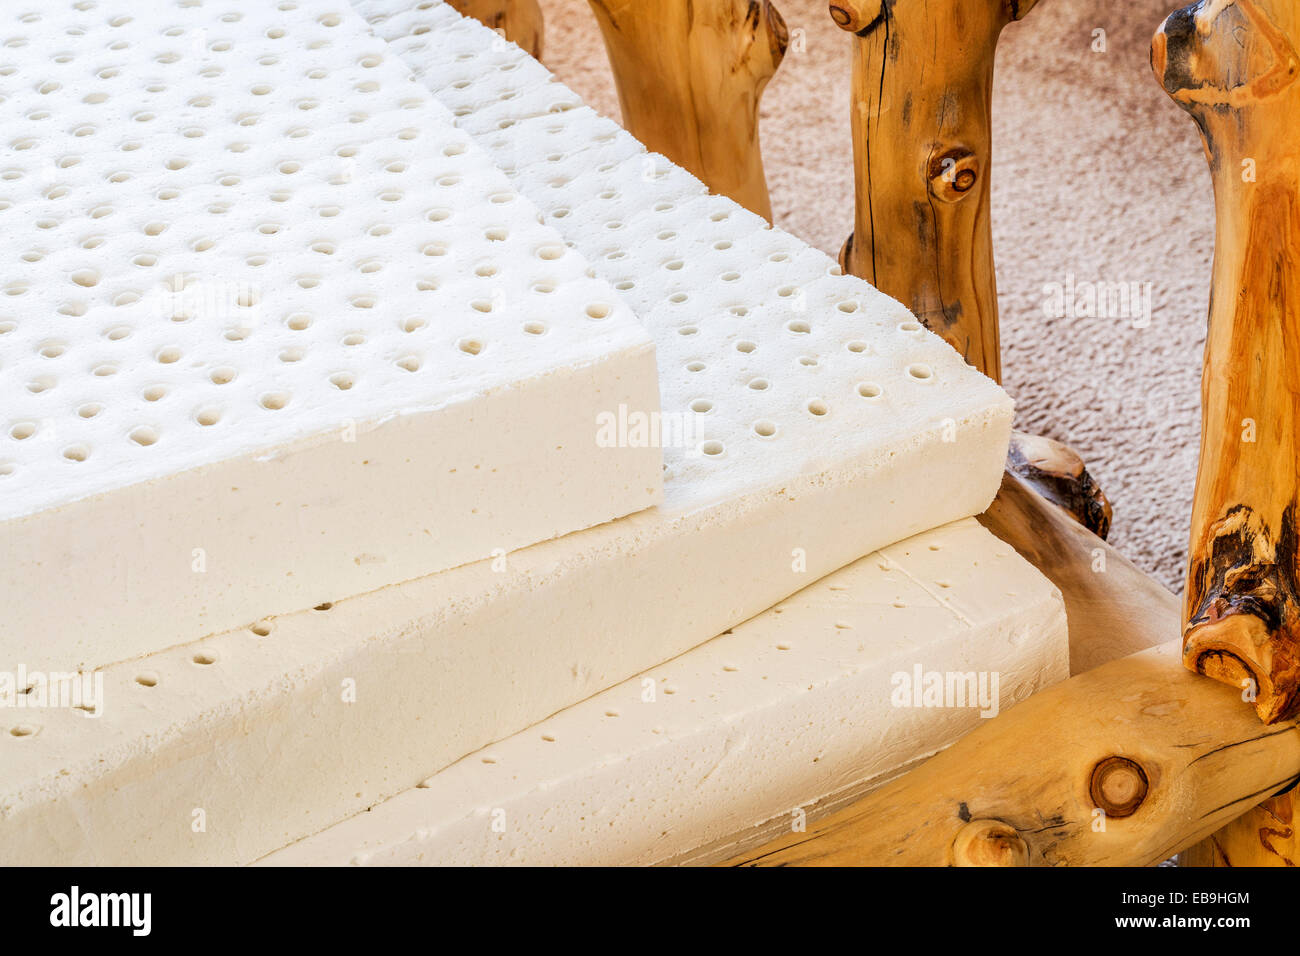 exposed layers of natural latex from an organic mattress Stock Photo